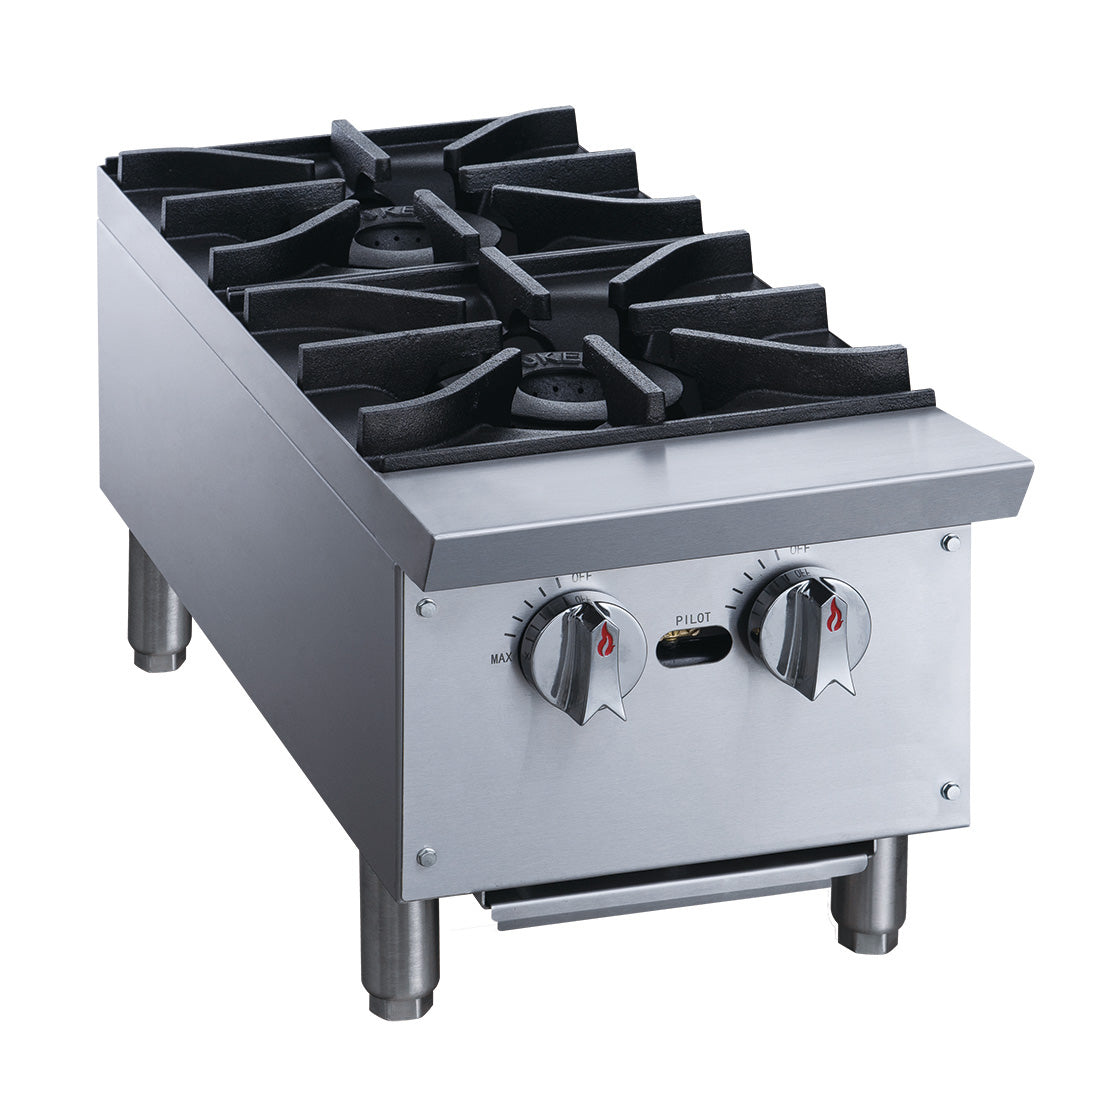 Chef AAA - TCHPA12, Commercial 12" Countertop Hot Plate with 2 Burners